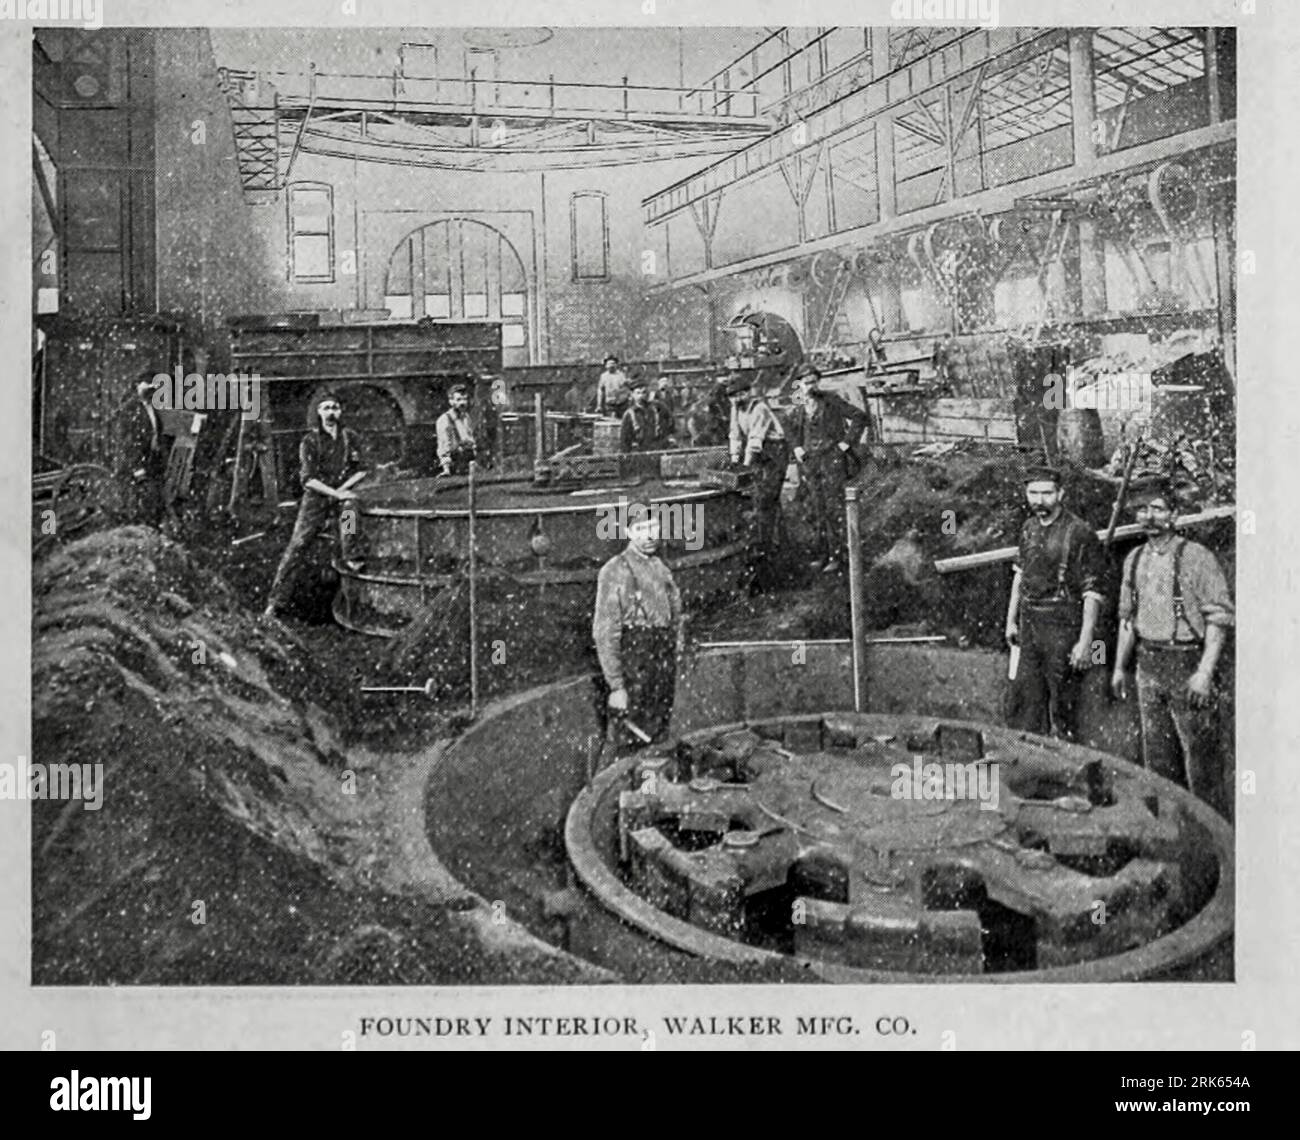 Foundry Interior Wlaker Mfg. Co. Cleveland, Ohio from the Article MODERN MACHINE-SHOP ECONOMICS PRIME REQUISITES OF SHOP CONSTRUCTION By Horace L. Arnold from The Engineering Magazine DEVOTED TO INDUSTRIAL PROGRESS Volume XI October 1896 NEW YORK The Engineering Magazine Co Stock Photo